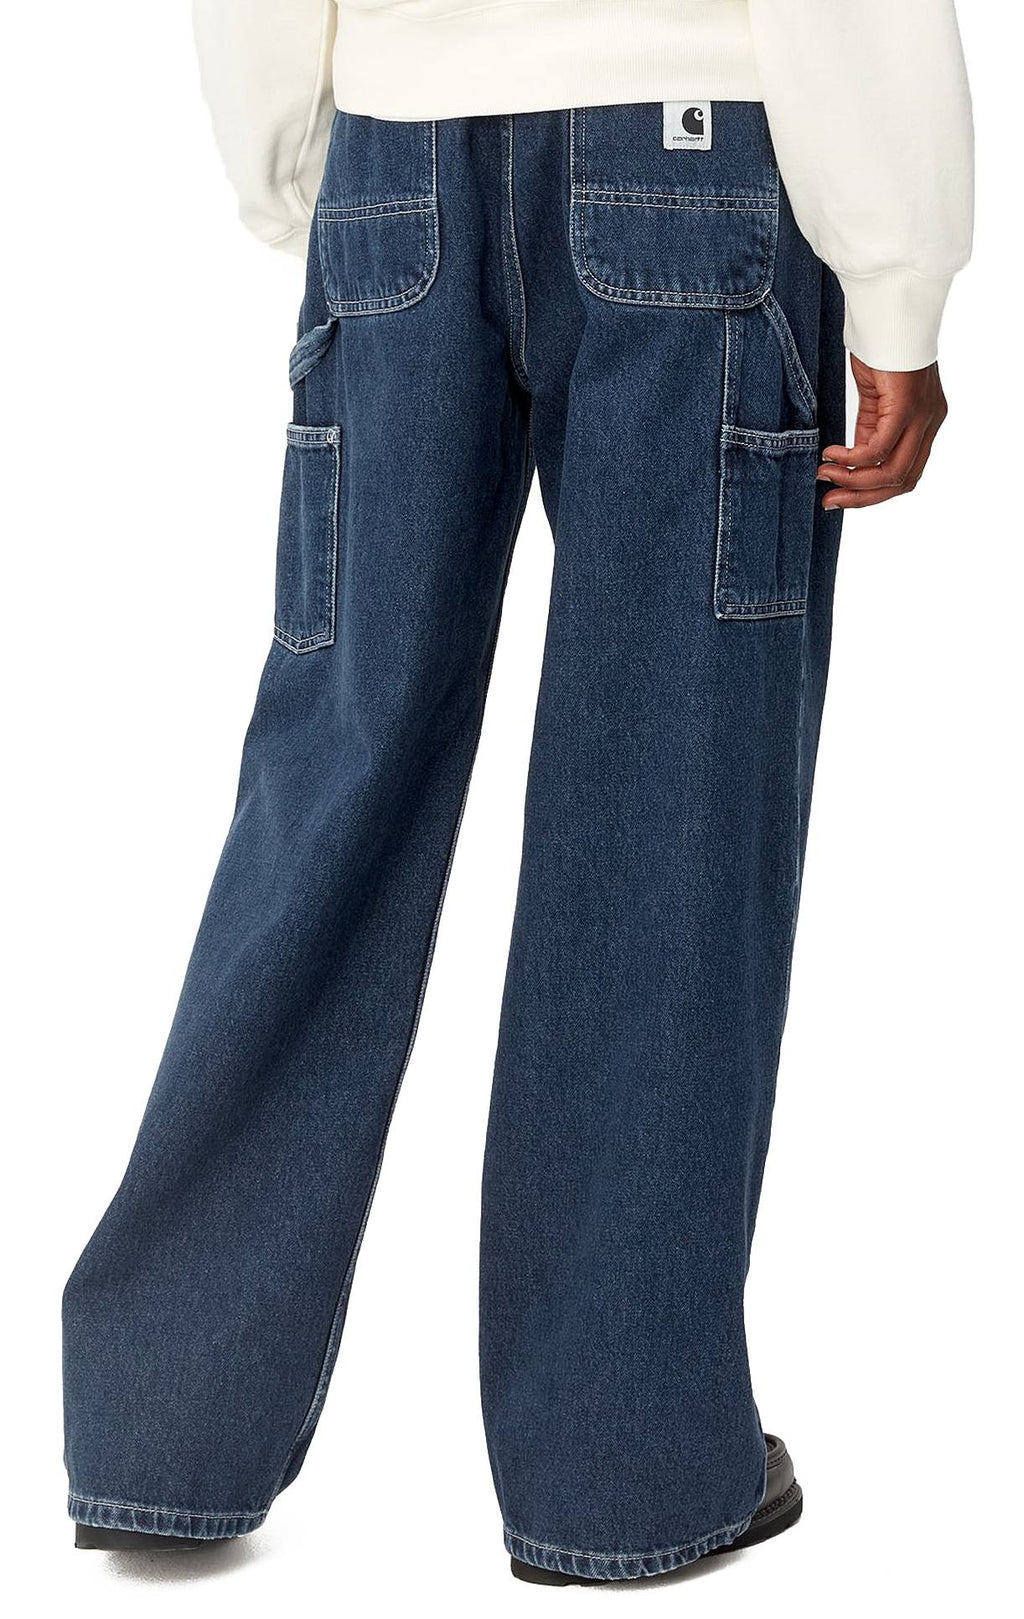  Carhartt Wip Jeans W Jens Pant Blue Stone Washed Donna - 3